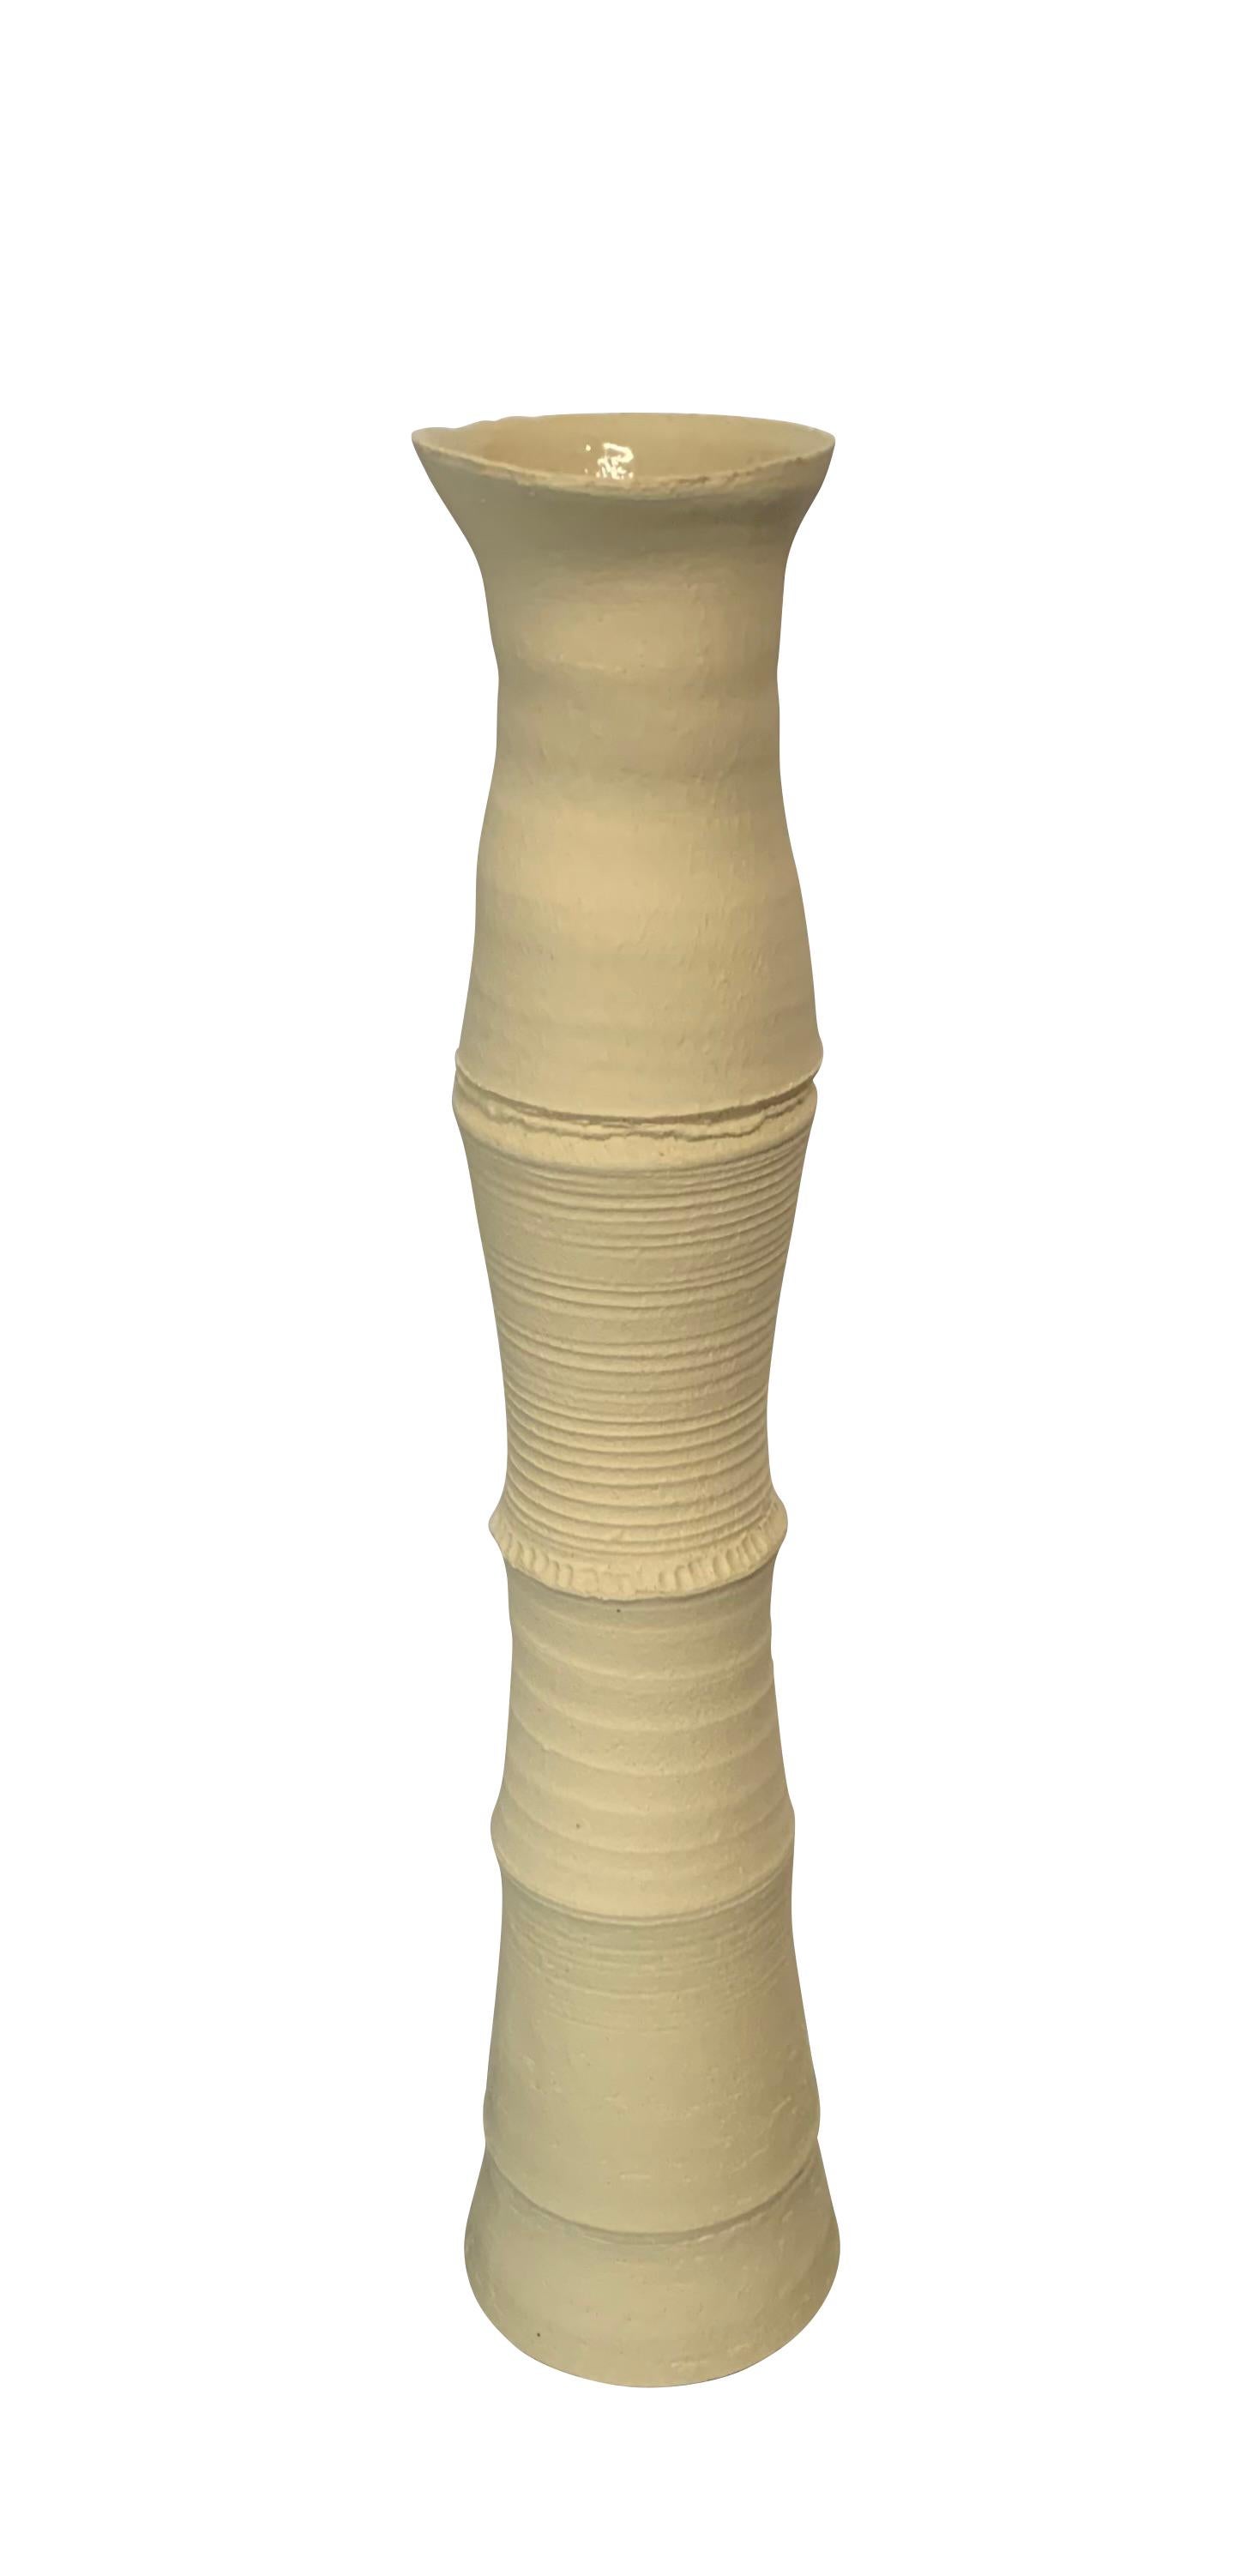 Contemporary German handmade stoneware vase.
Vertebrae design.
Sand color stoneware.
Part of a large collection of handmade vases of different sizes , shapes and textures.